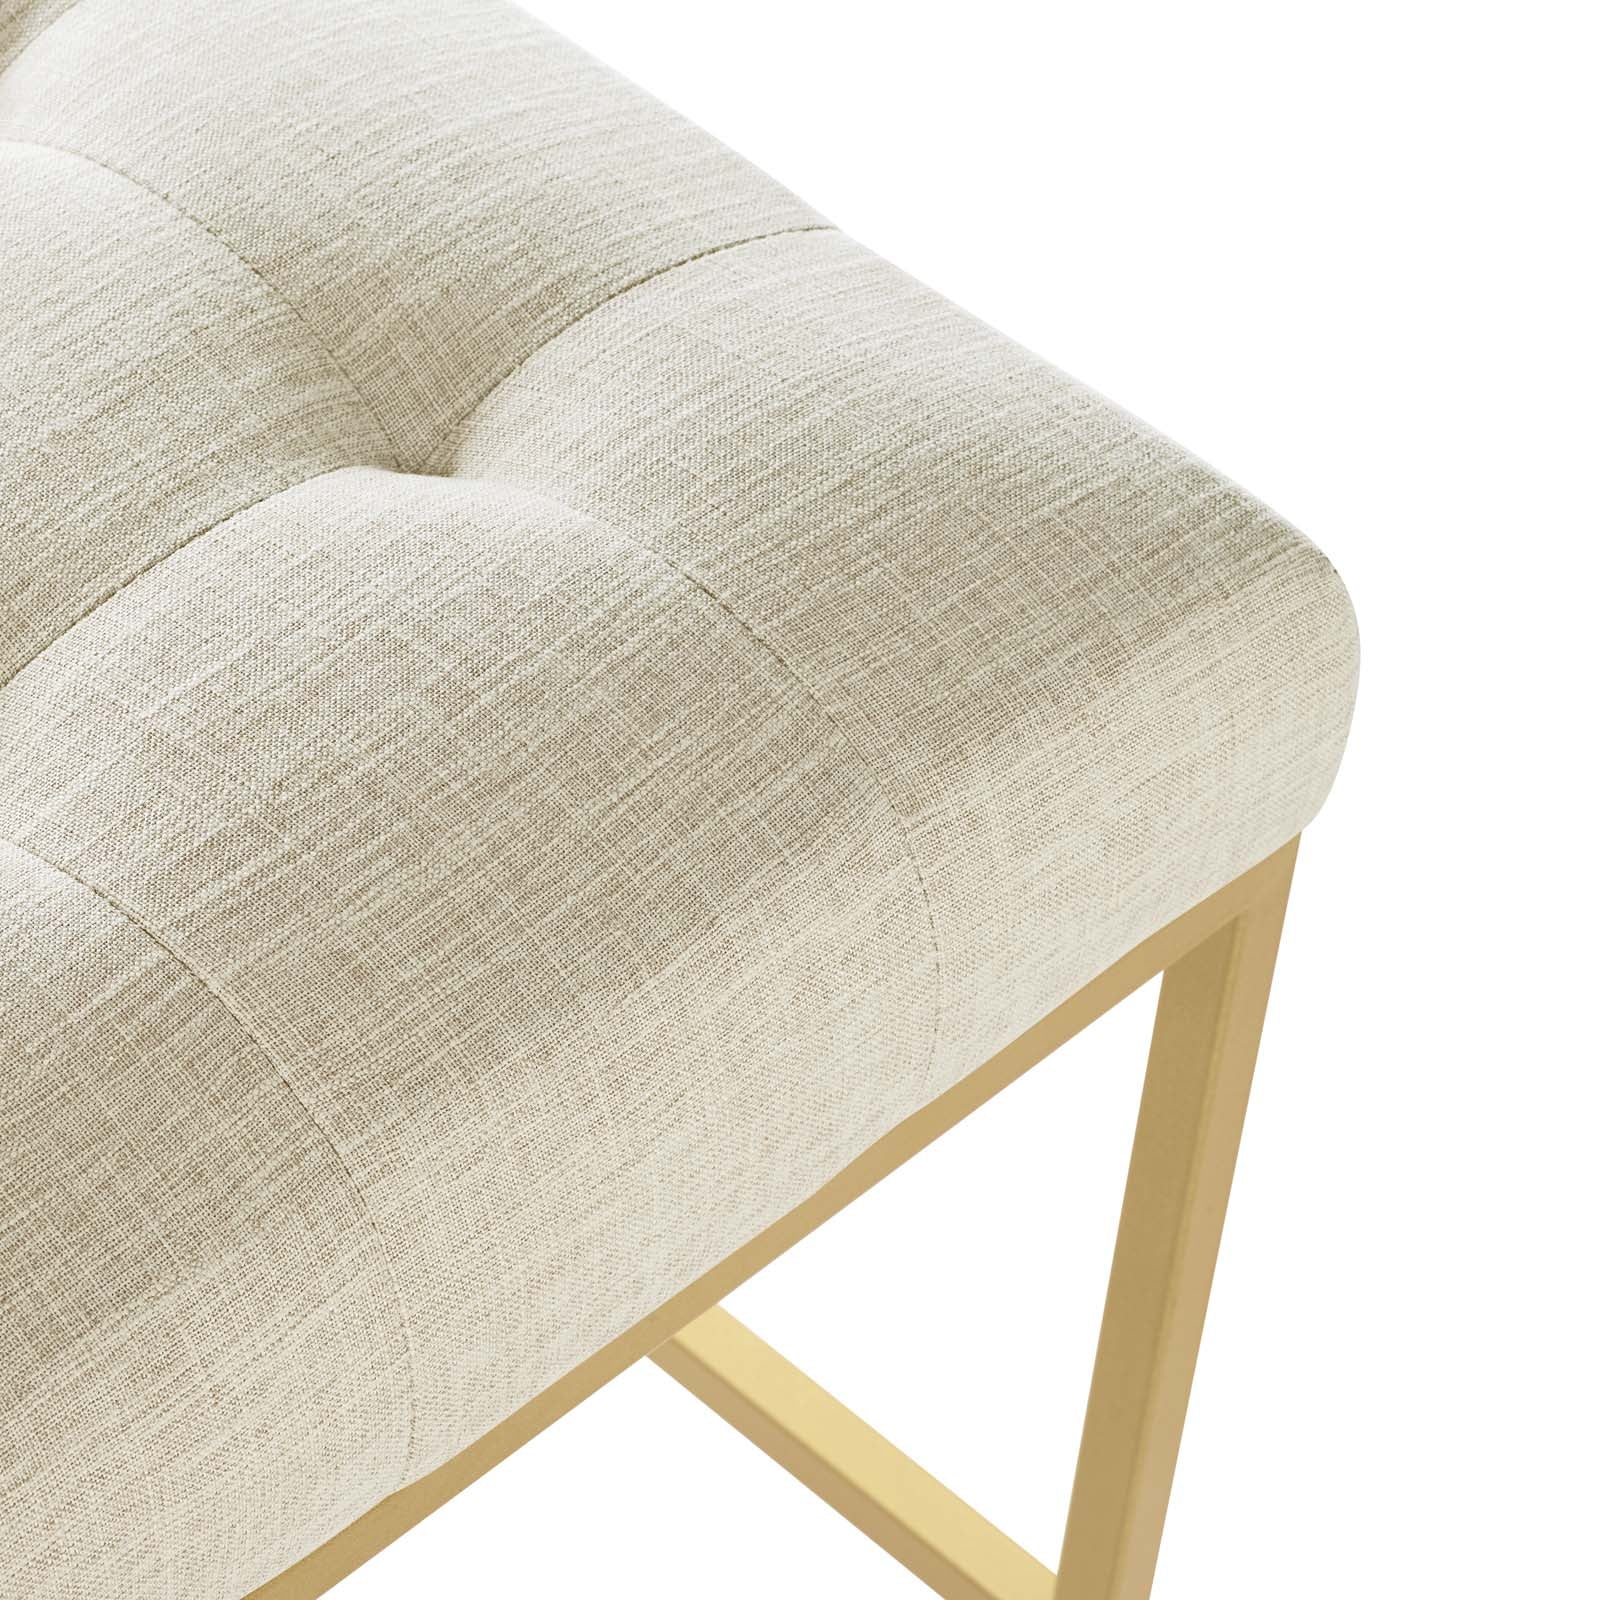 Privy Gold Stainless Steel Upholstered Fabric Bar Stool-Bar Stool-Modway-Wall2Wall Furnishings